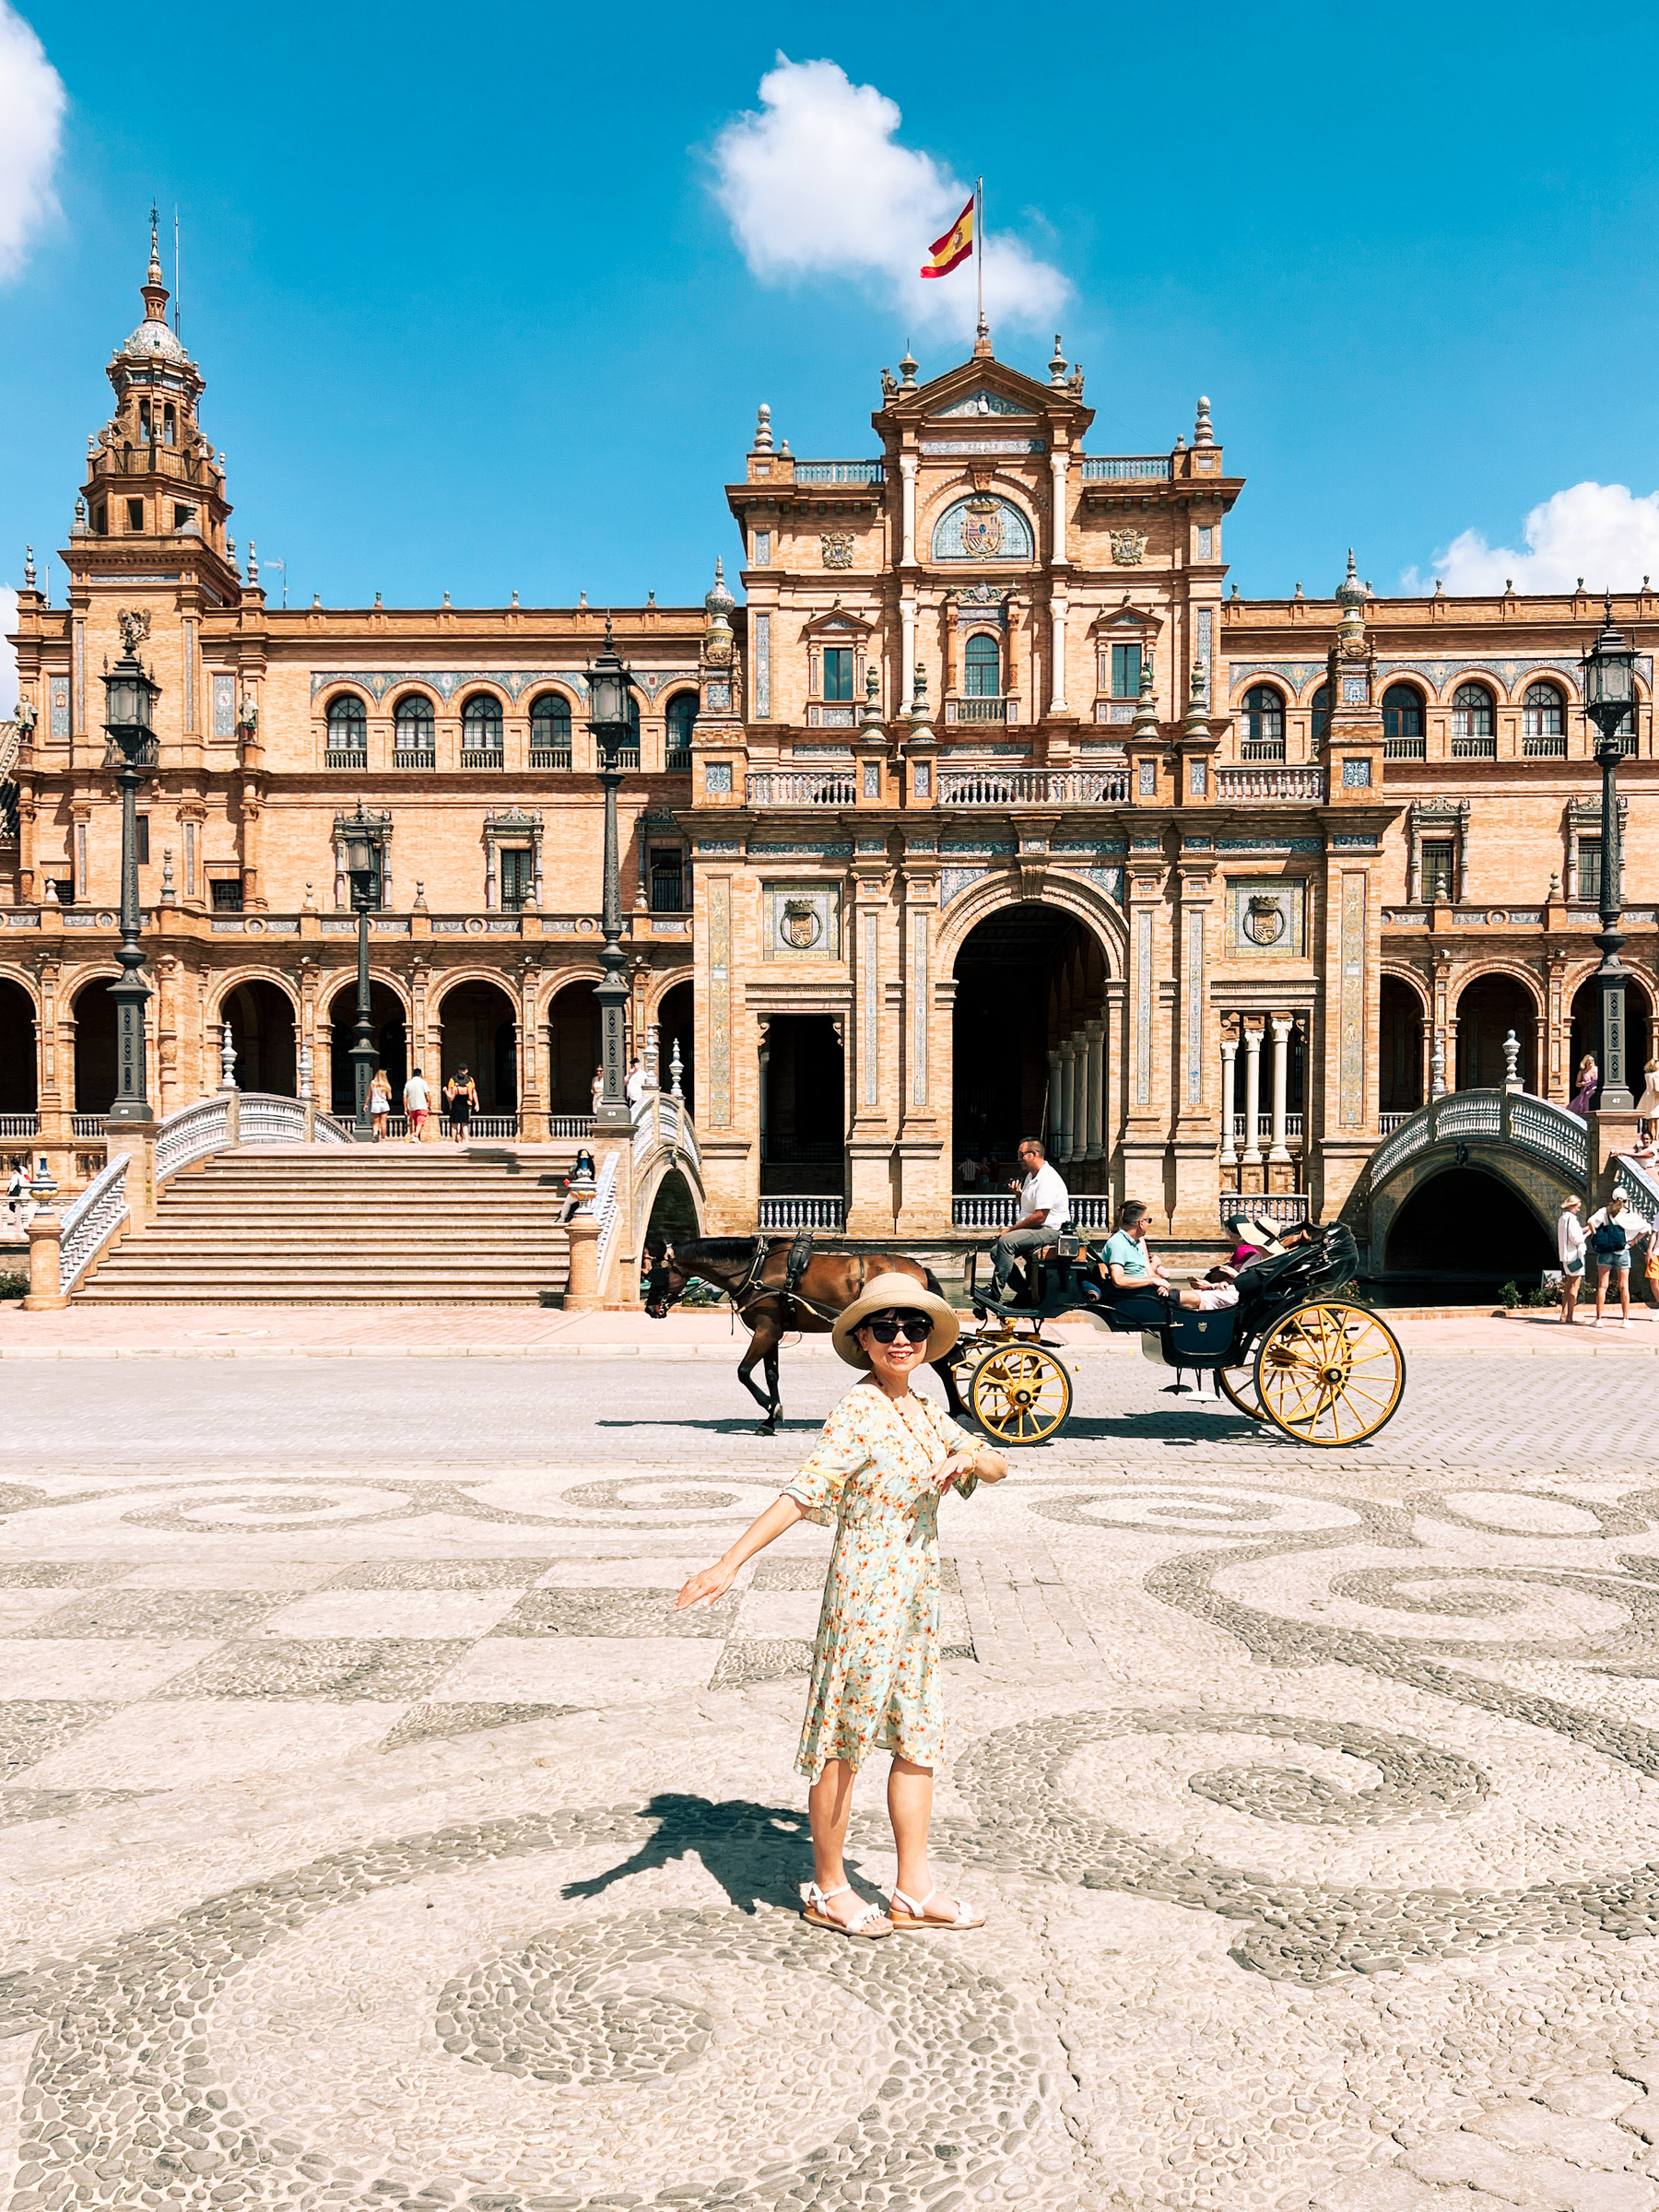 A tourist poses for a photo at Plaza de España, while a carriage goes by in the background. 